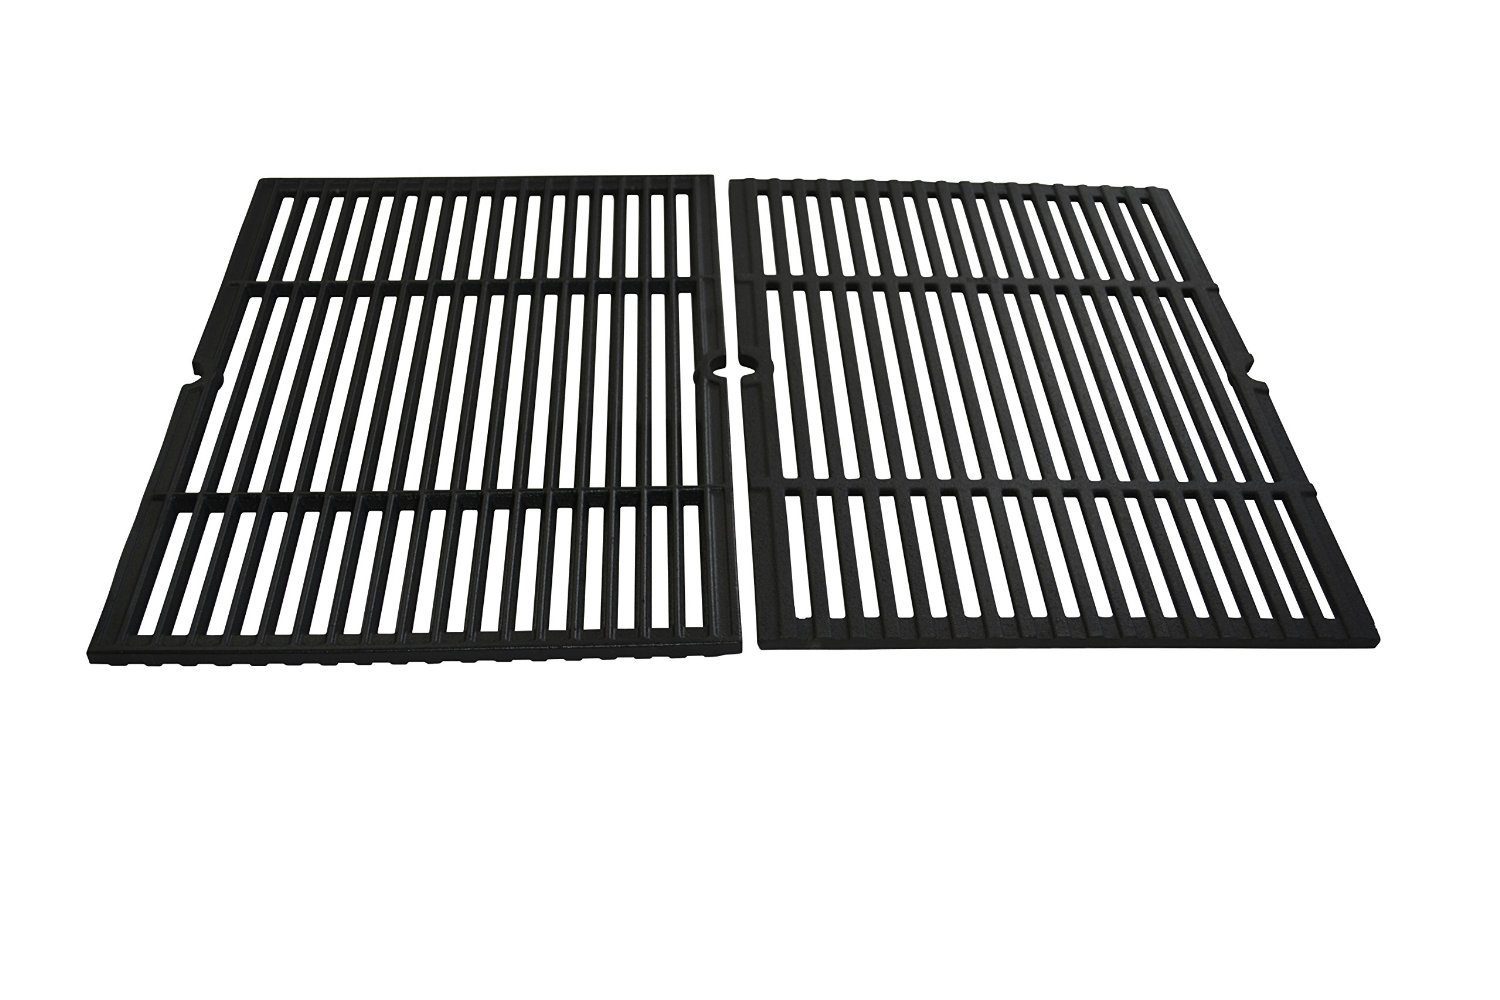 Matte Cast Iron Cooking Grid for Charbroil, Coleman, Kenmore, Master forge, Thermos, Uniflame Brand Gas Grills